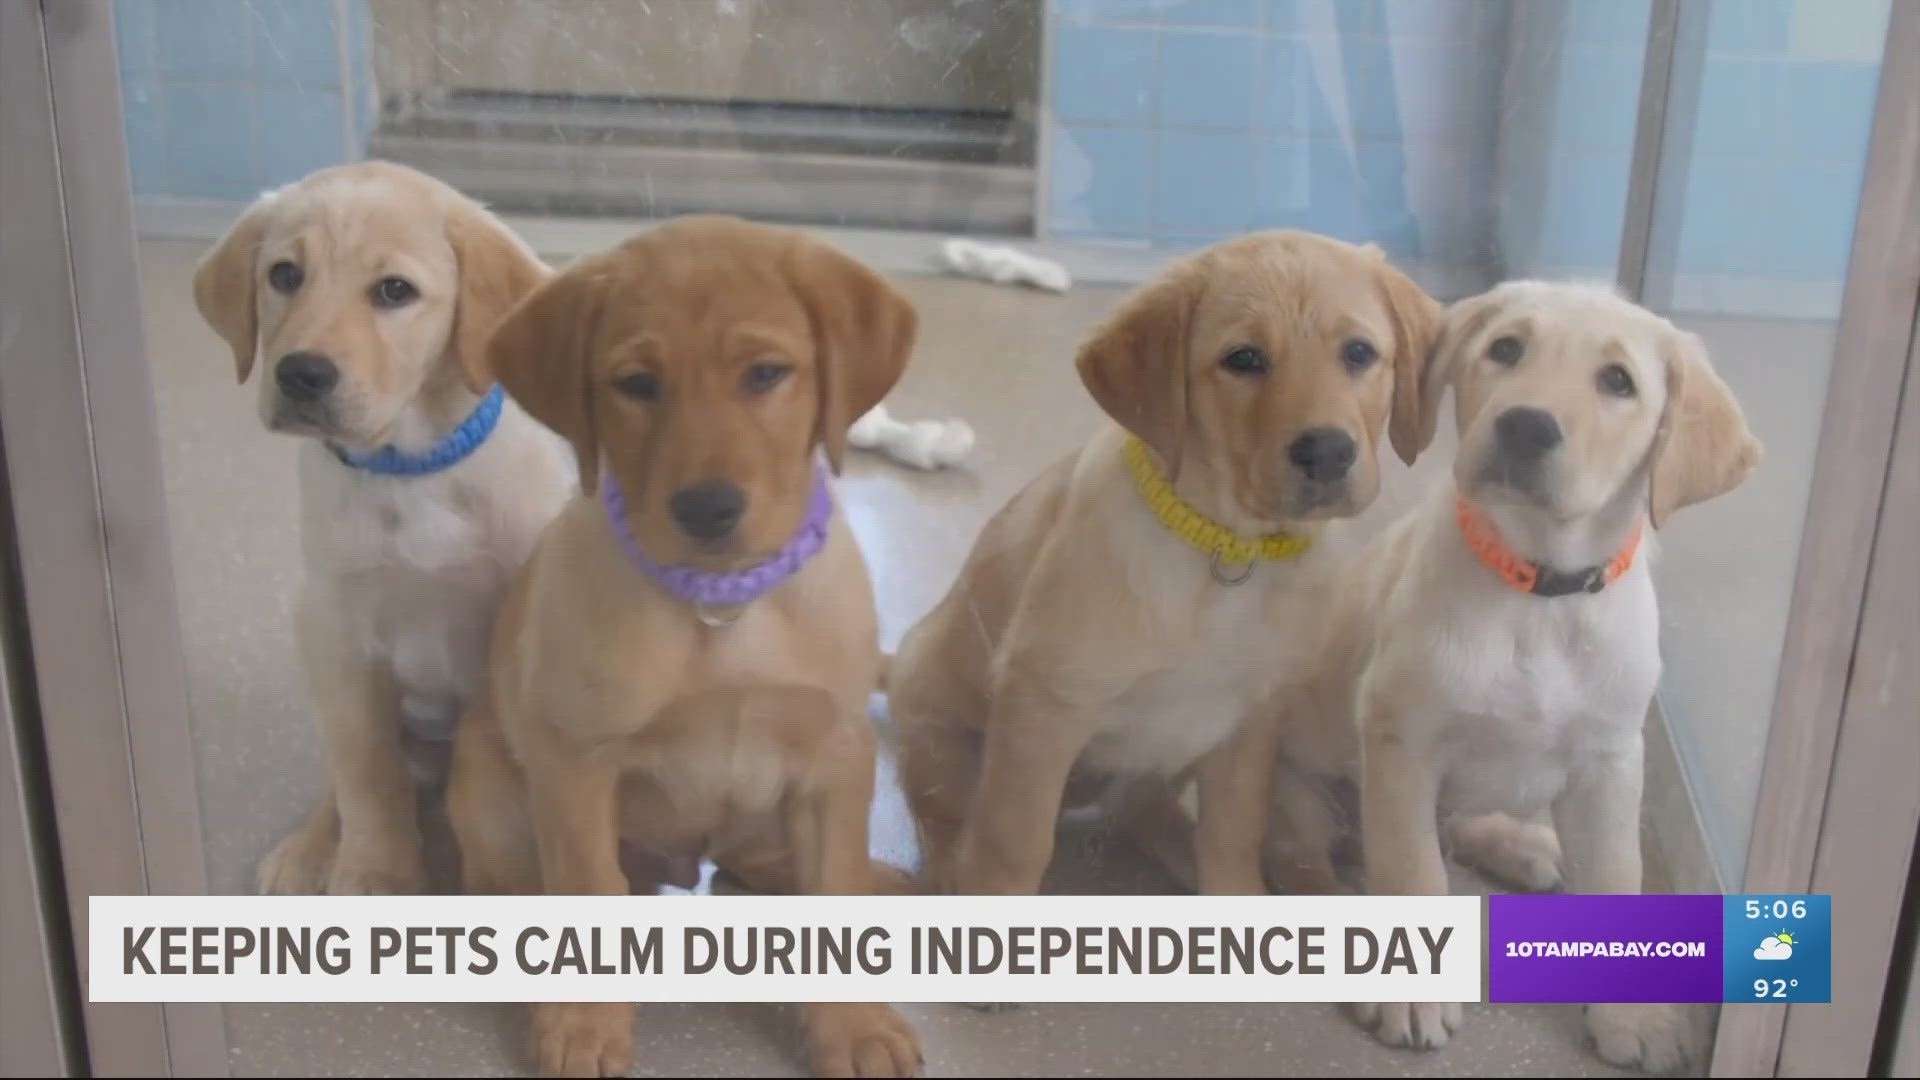 Suncoast Humane Society is looking for volunteers to come in and help comfort their animals this Independence Day.